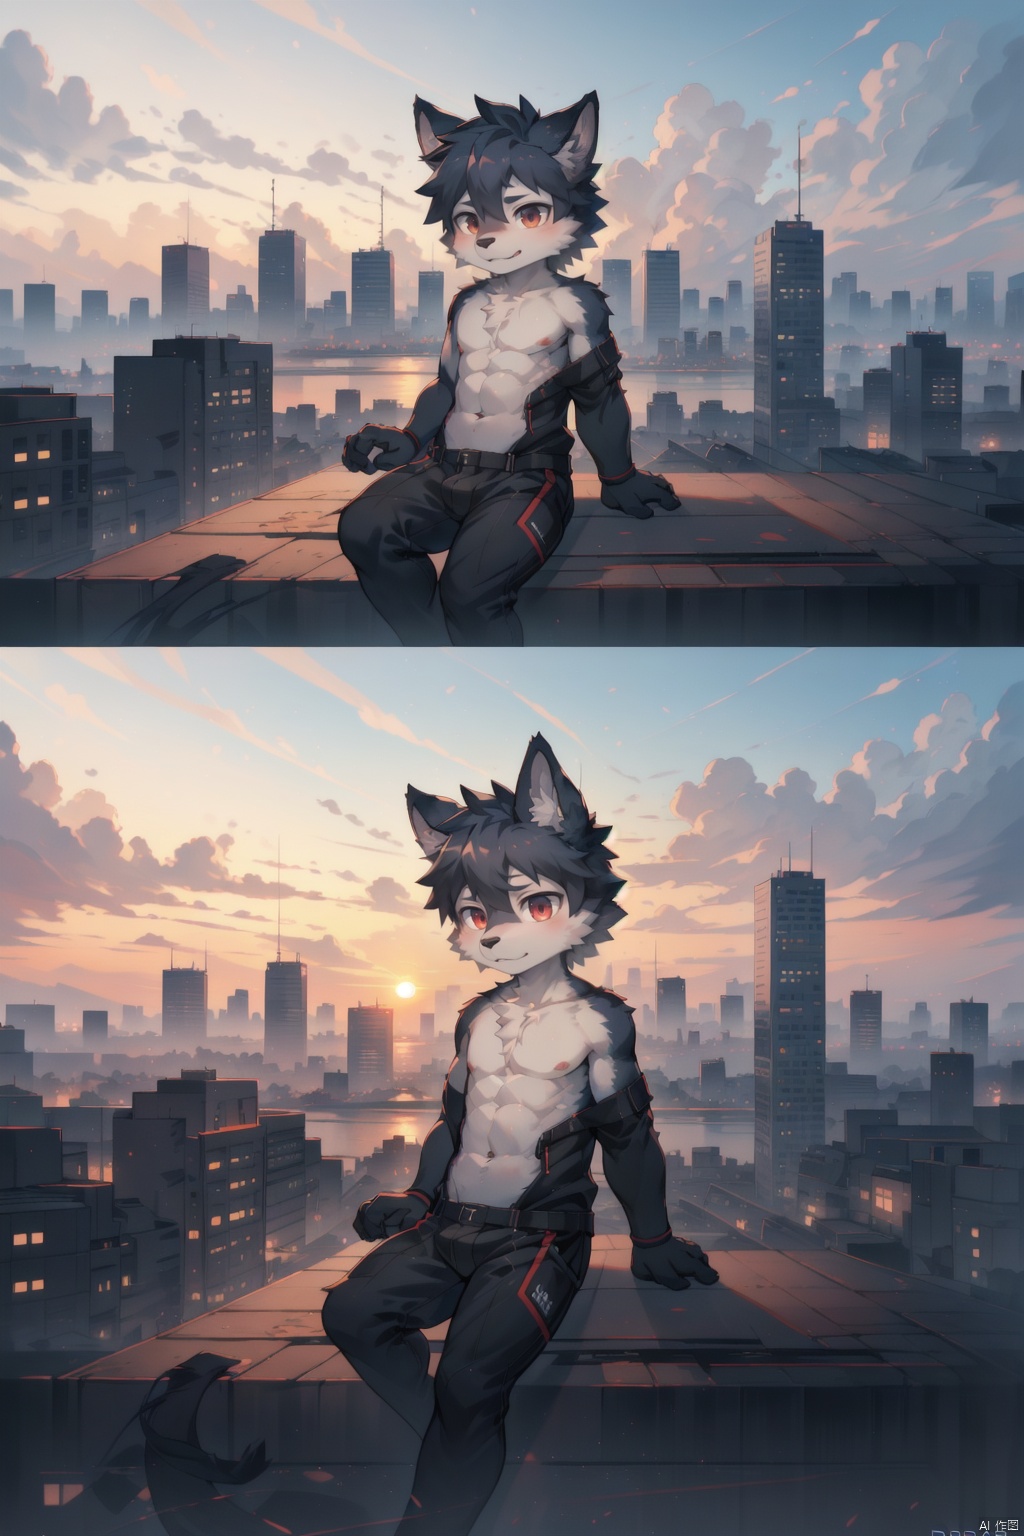  Best quality, masterpiece, photorealistic, 32K uhd, official Art,
1girl, dofas, solo,cityscape,sunset,double exposure photography, furry, shota